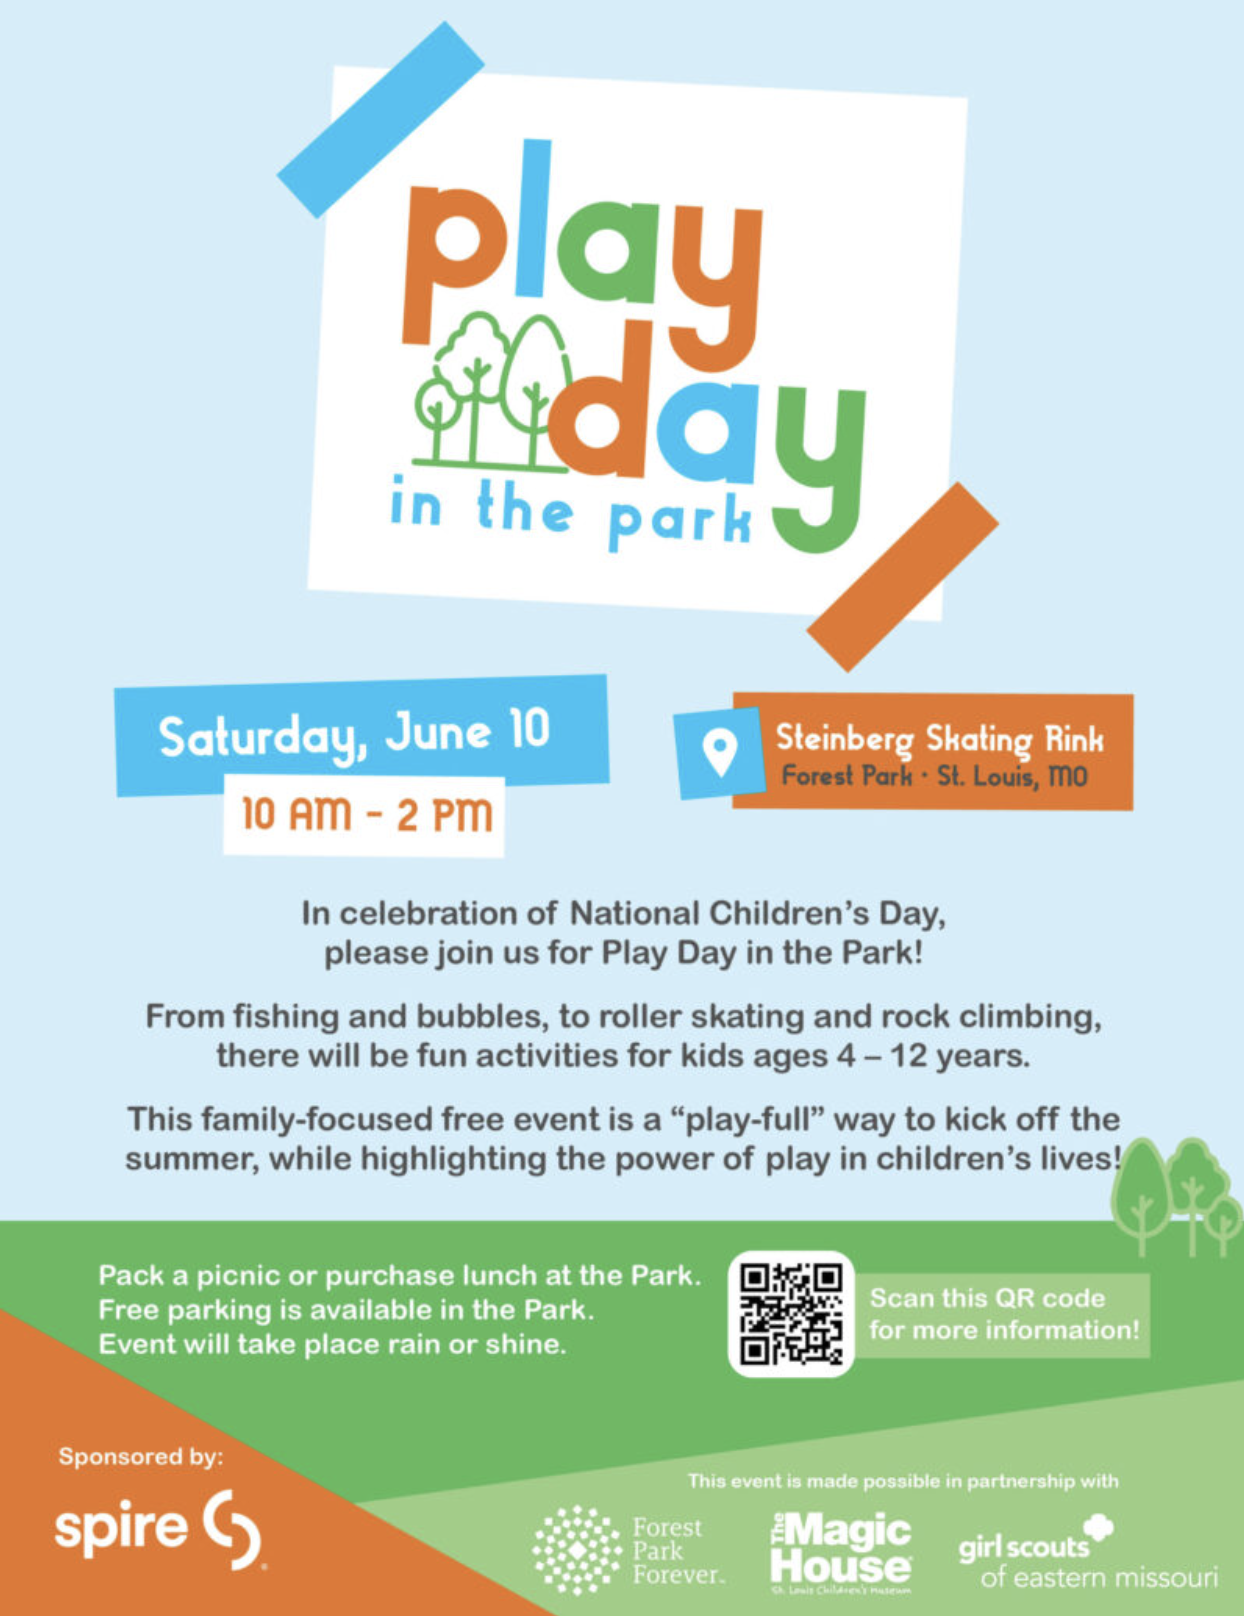 PARK OUT - Play Online for Free!